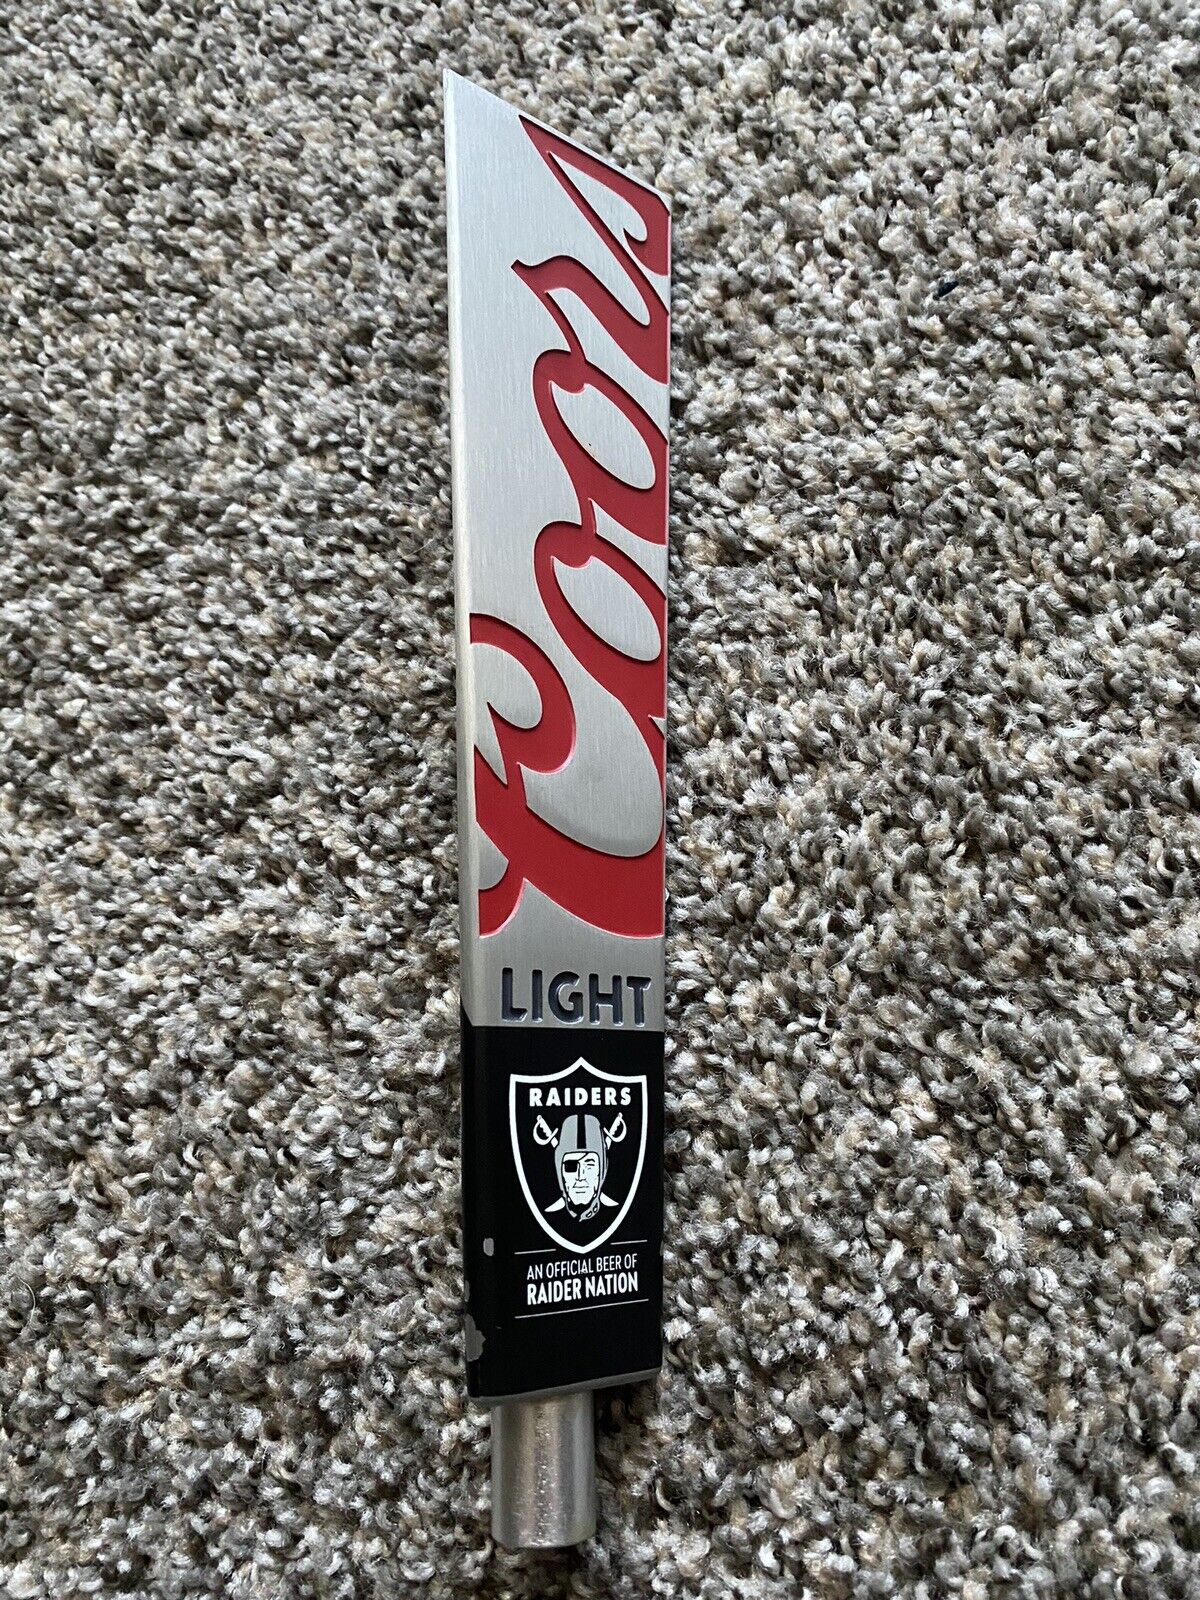 Coors Special Edition Raiders Beer Tap Handle